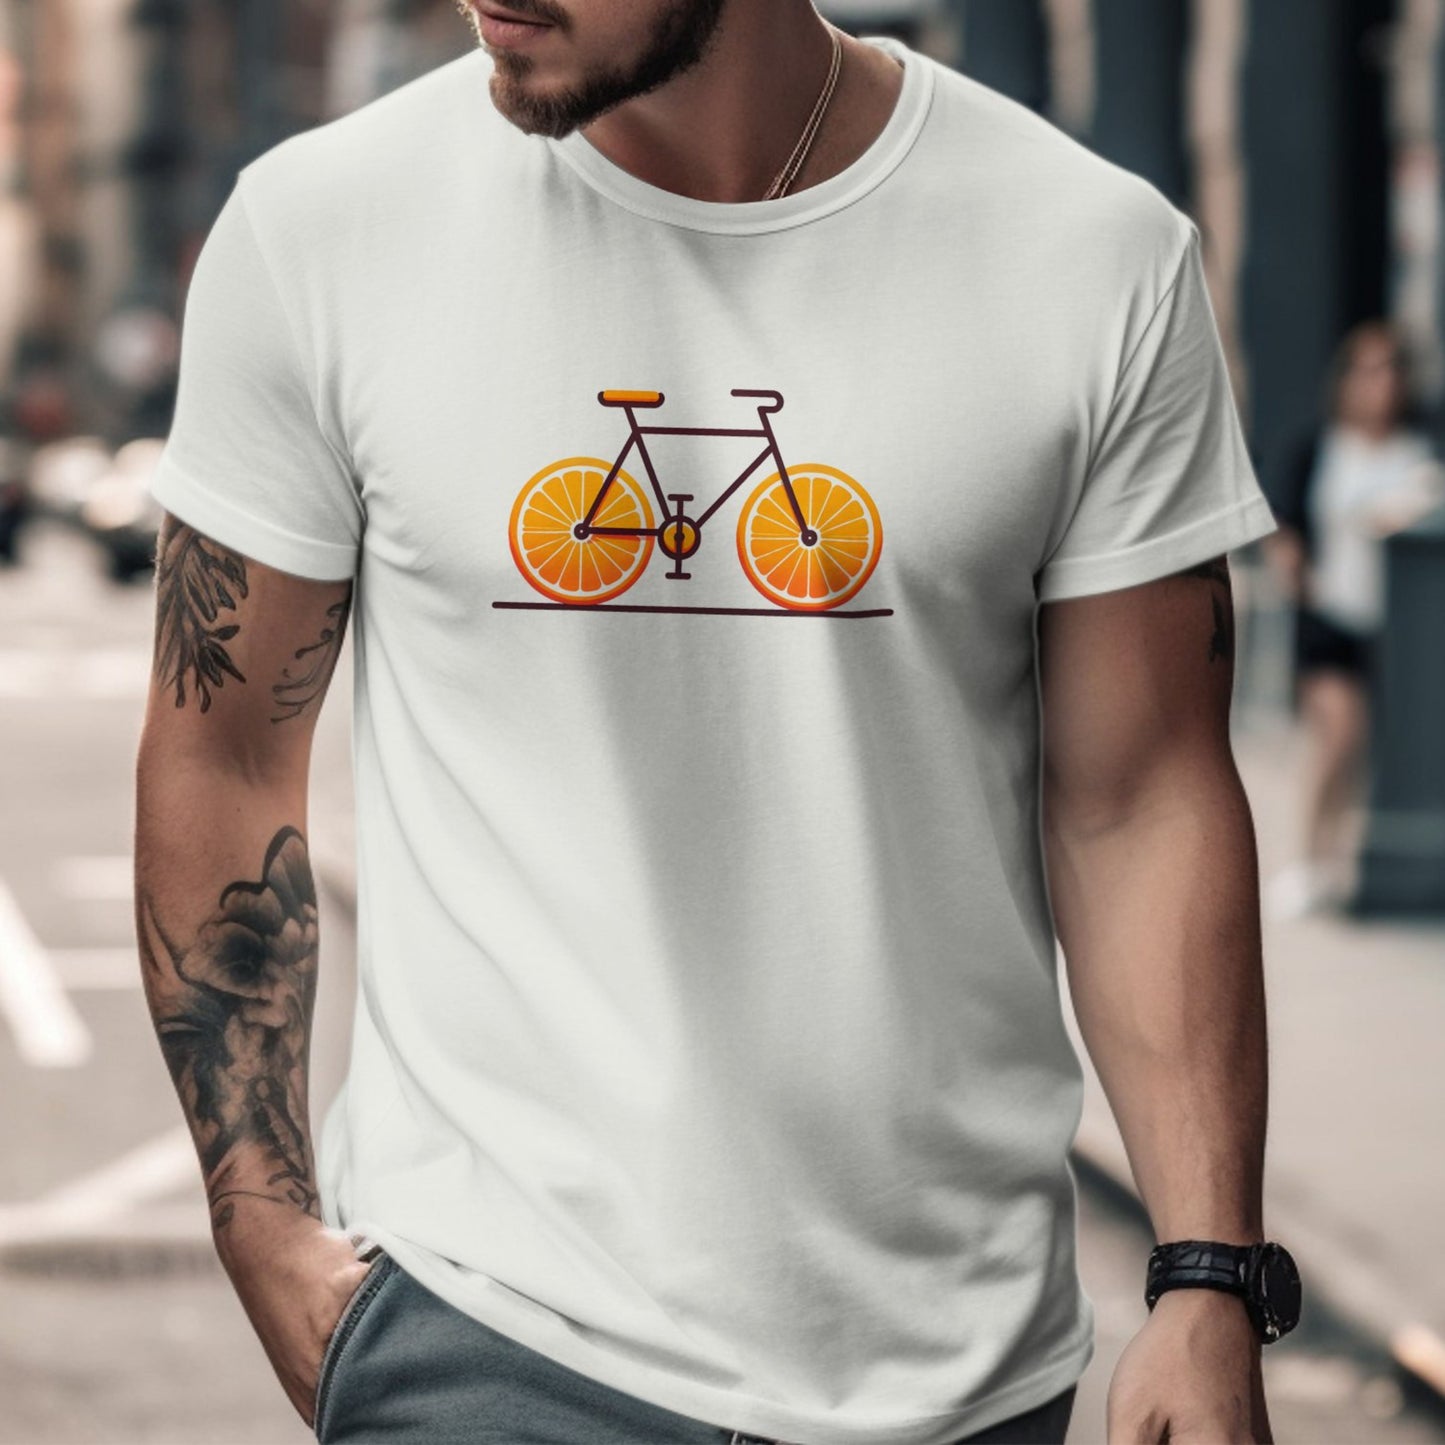 Bicycle with orange slices wheels Graphic T-Shirt for Men